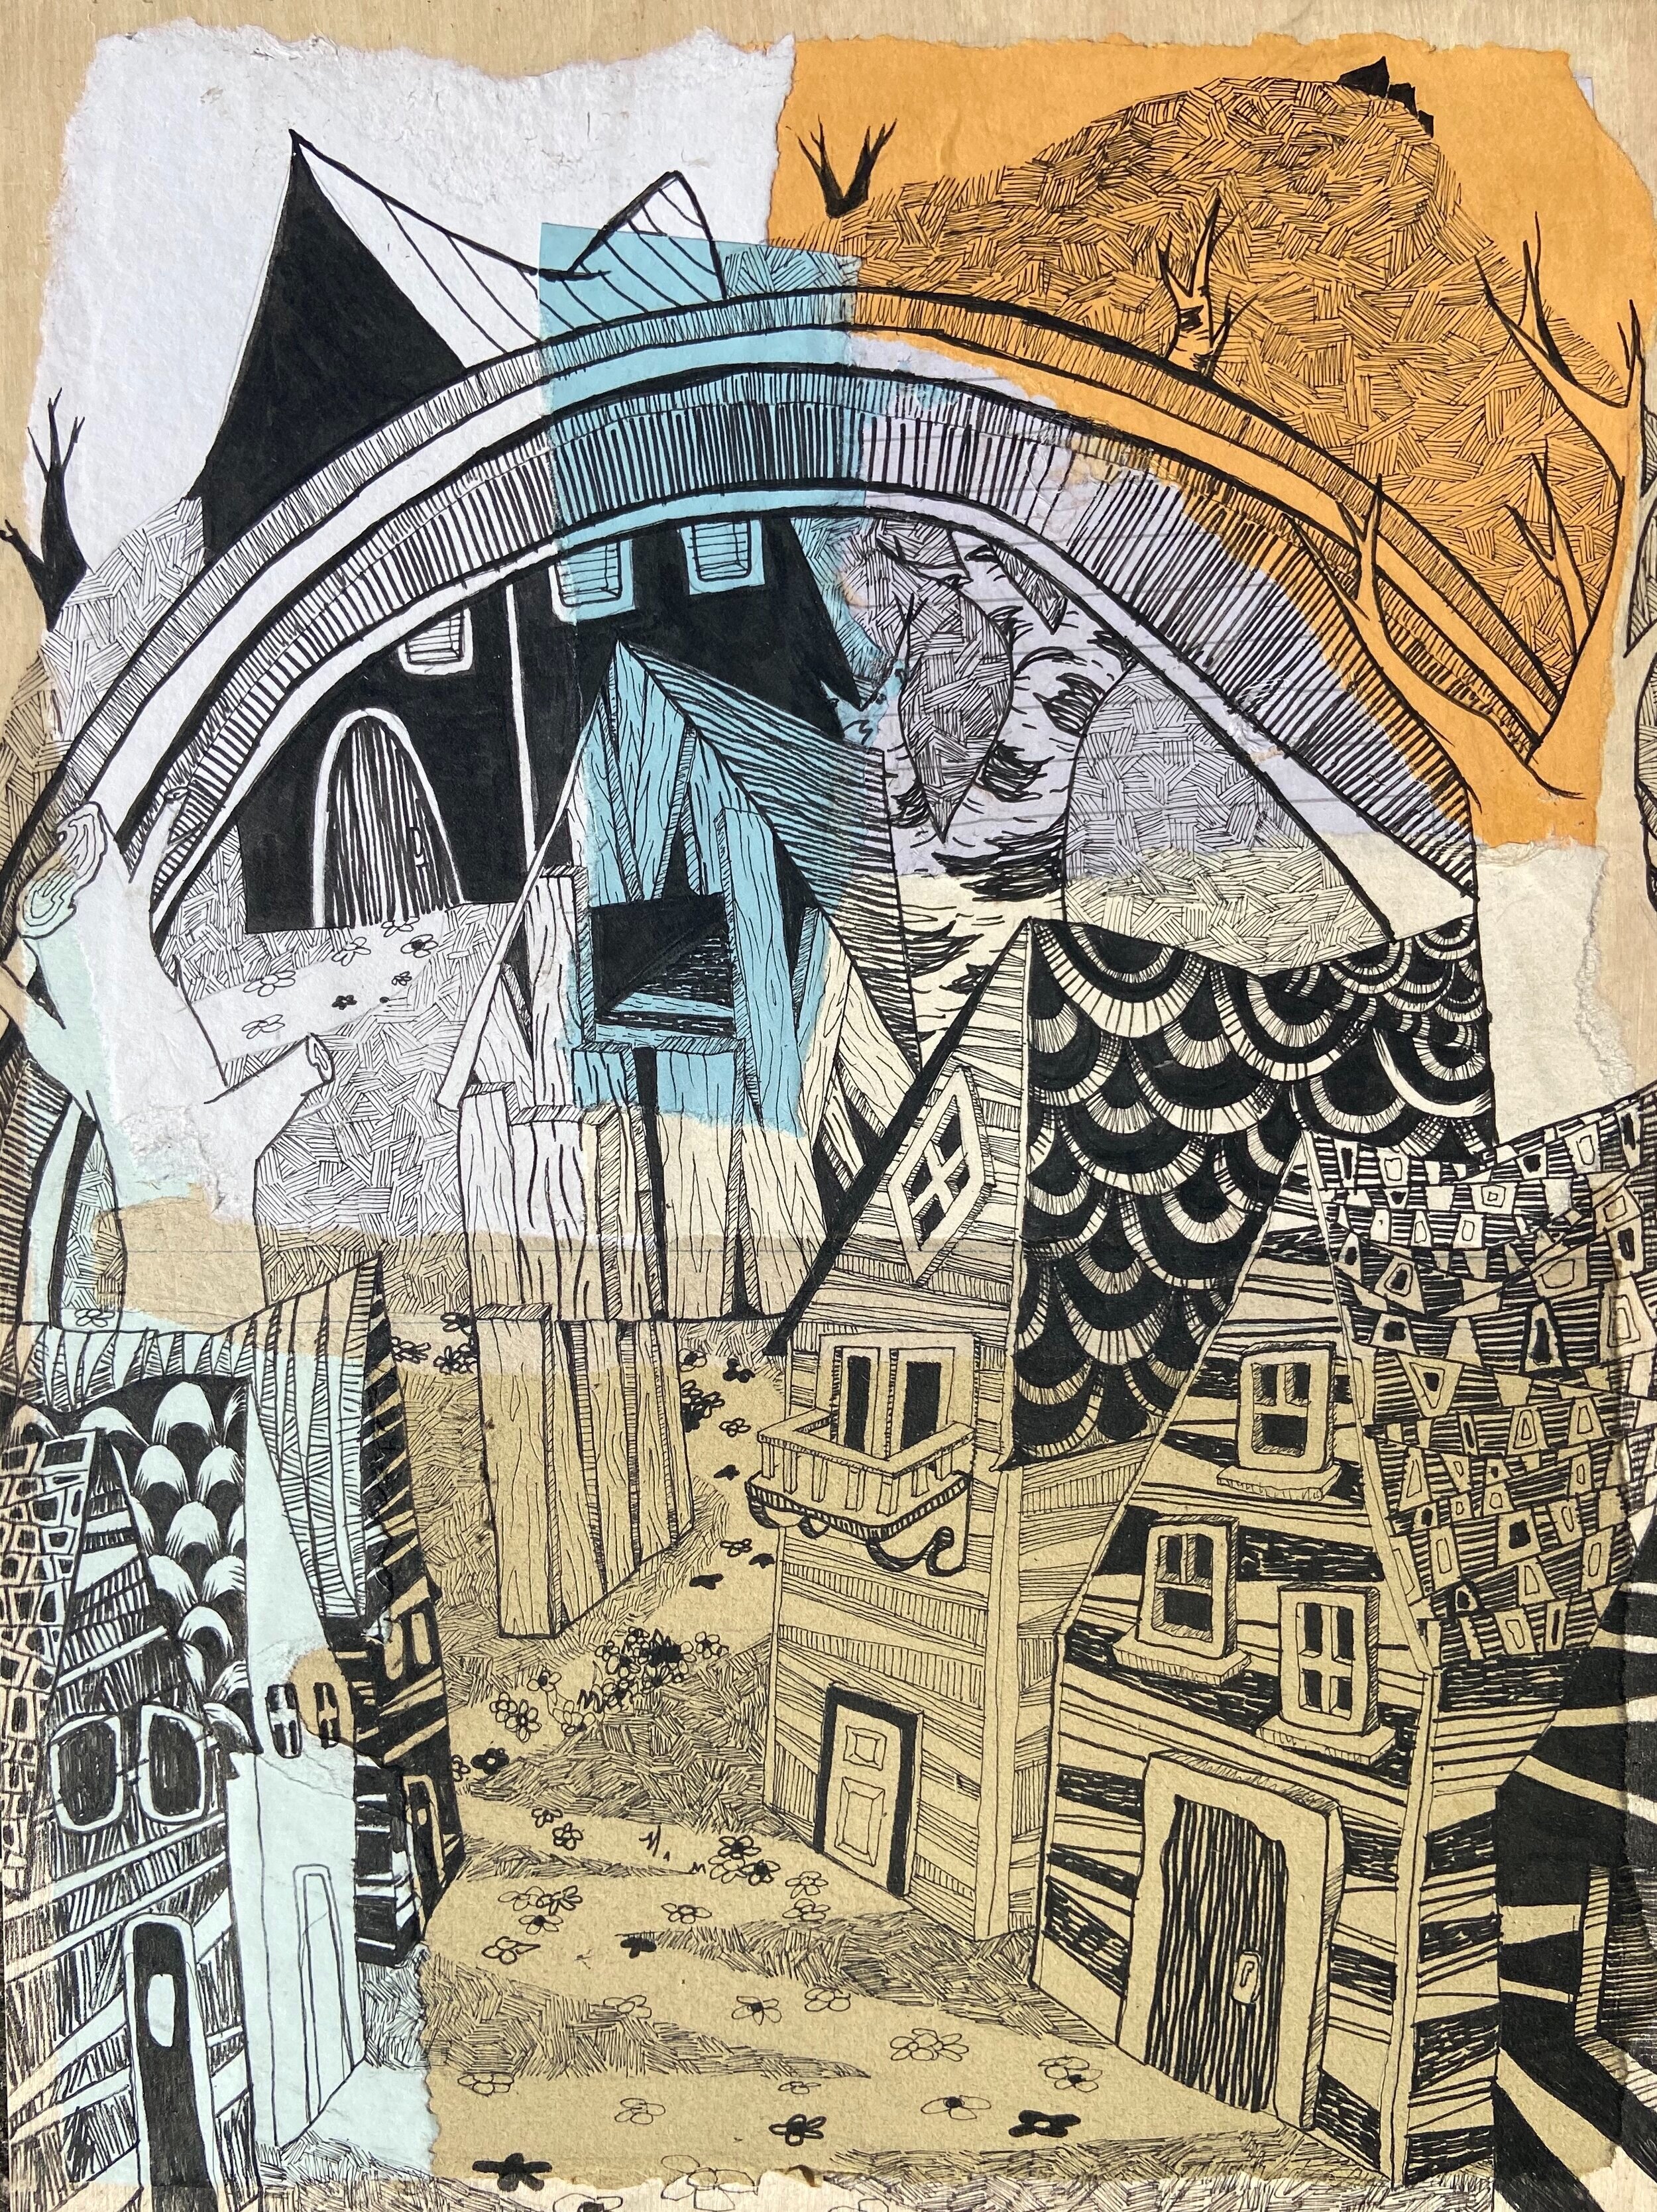   2020, Ink on Collaged Paper, Mounted on Wood, 12”x9”Inches  